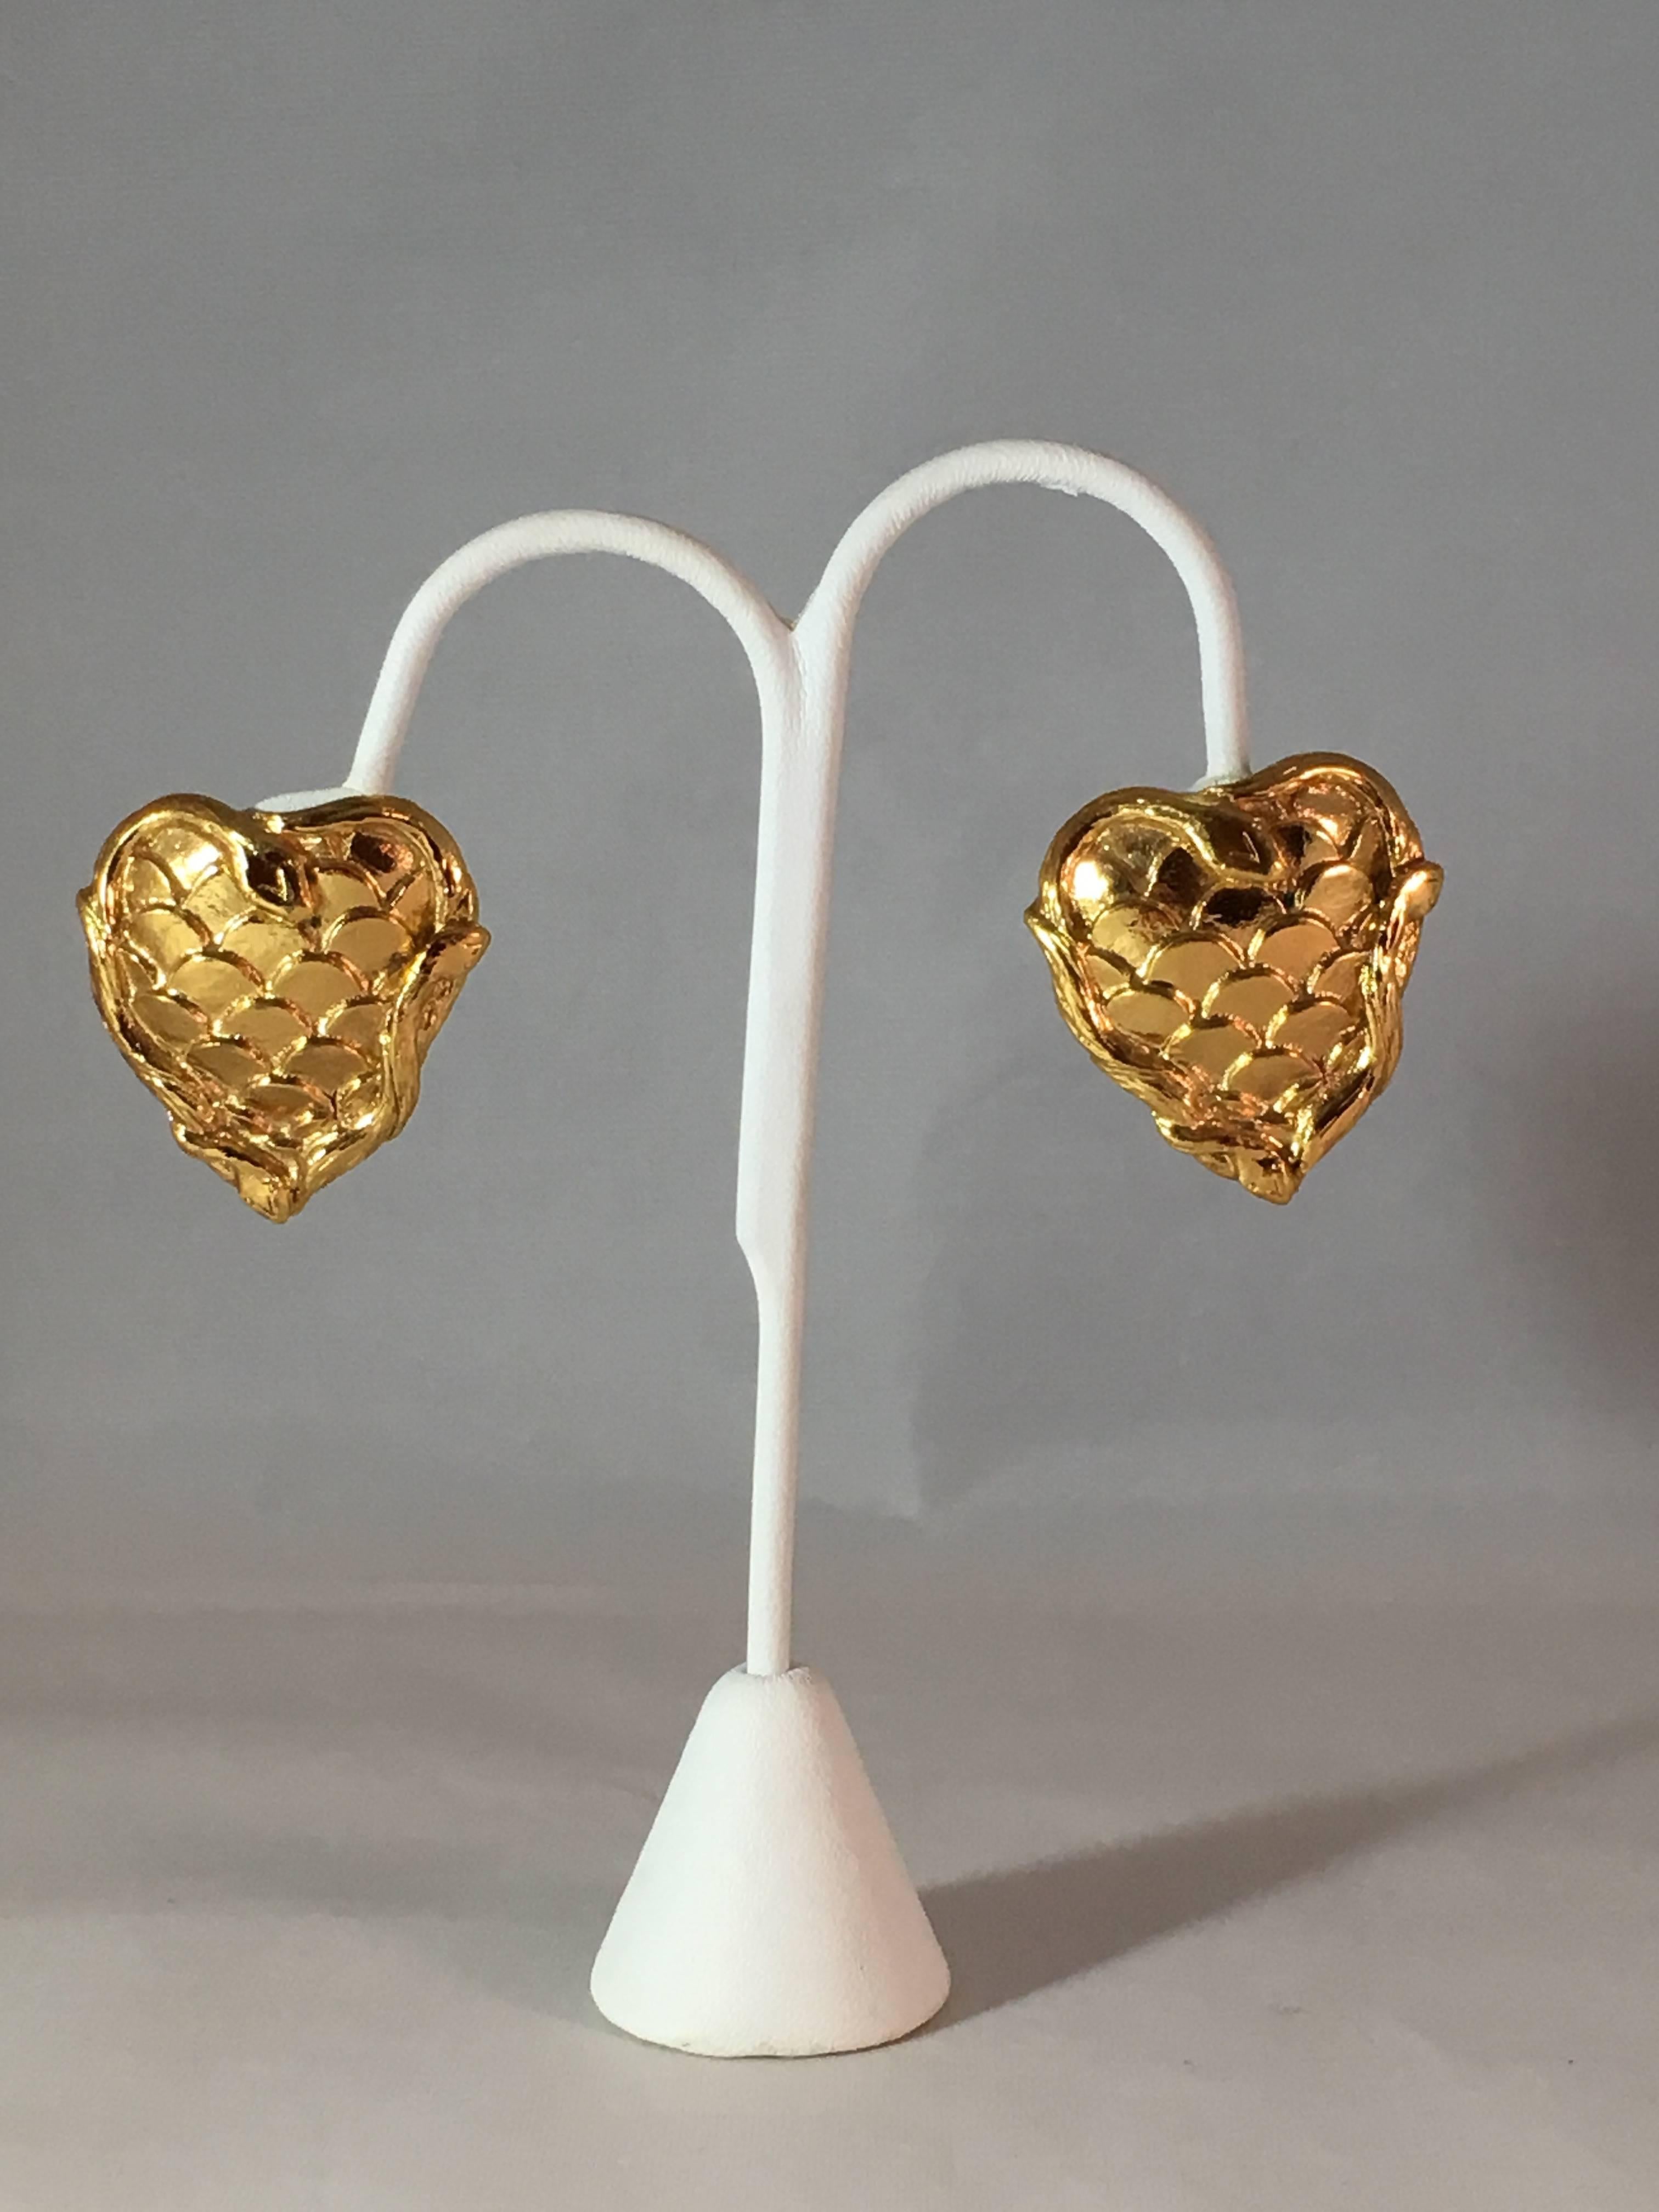 These fabulous goldtone Yves Saint Laurent heart clip-on earrings feature a snakeskin pattern in the center and are surrounded on the edges by snakes. Snakes and hearts were commonly used symbols by Yves Saint Laurent. The earrings are marked YSL on